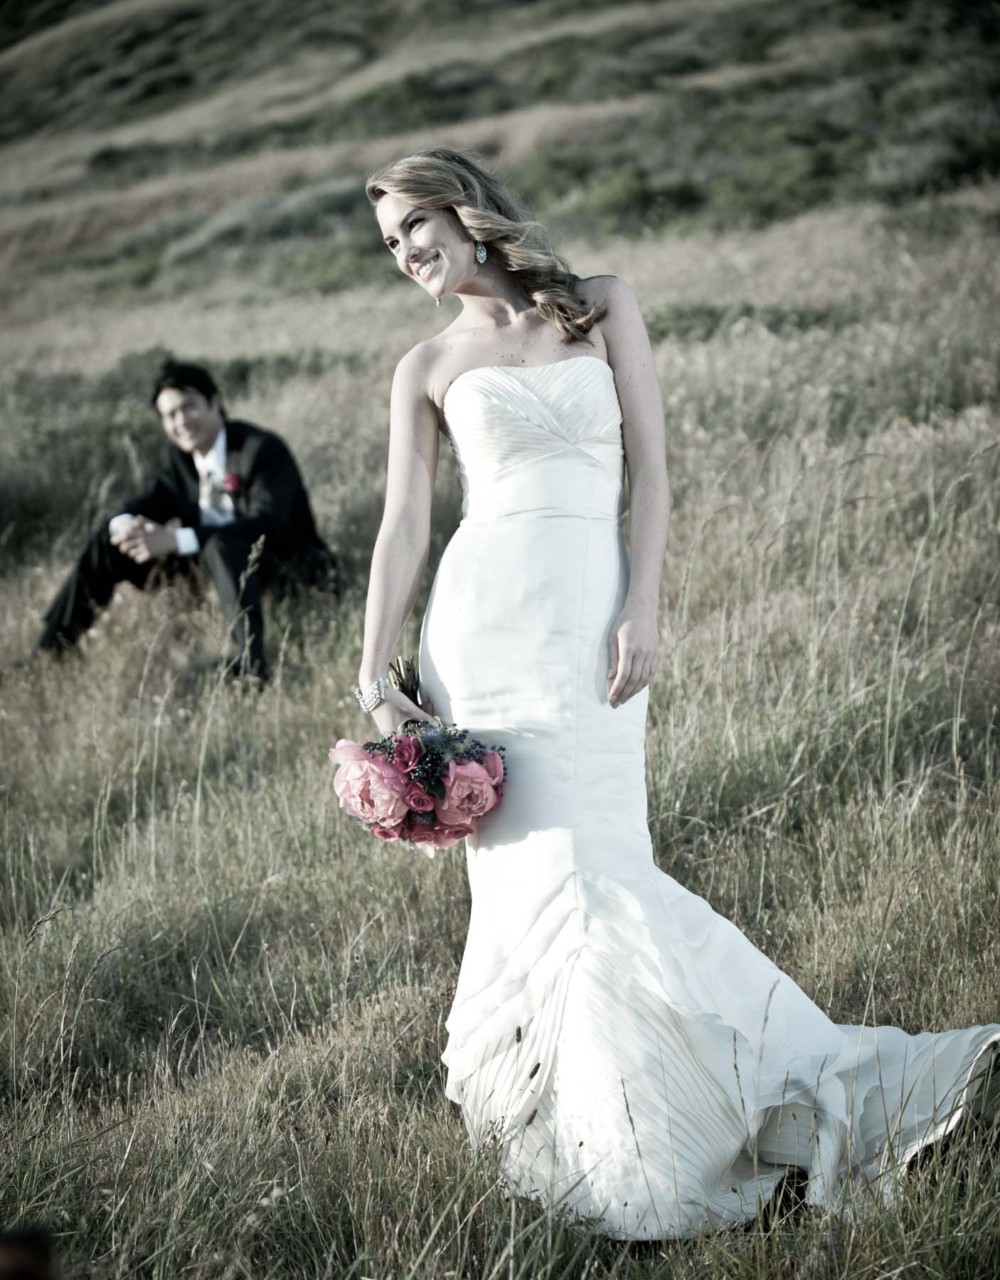 Looking for a top-rated wedding photographer in Anchorage?